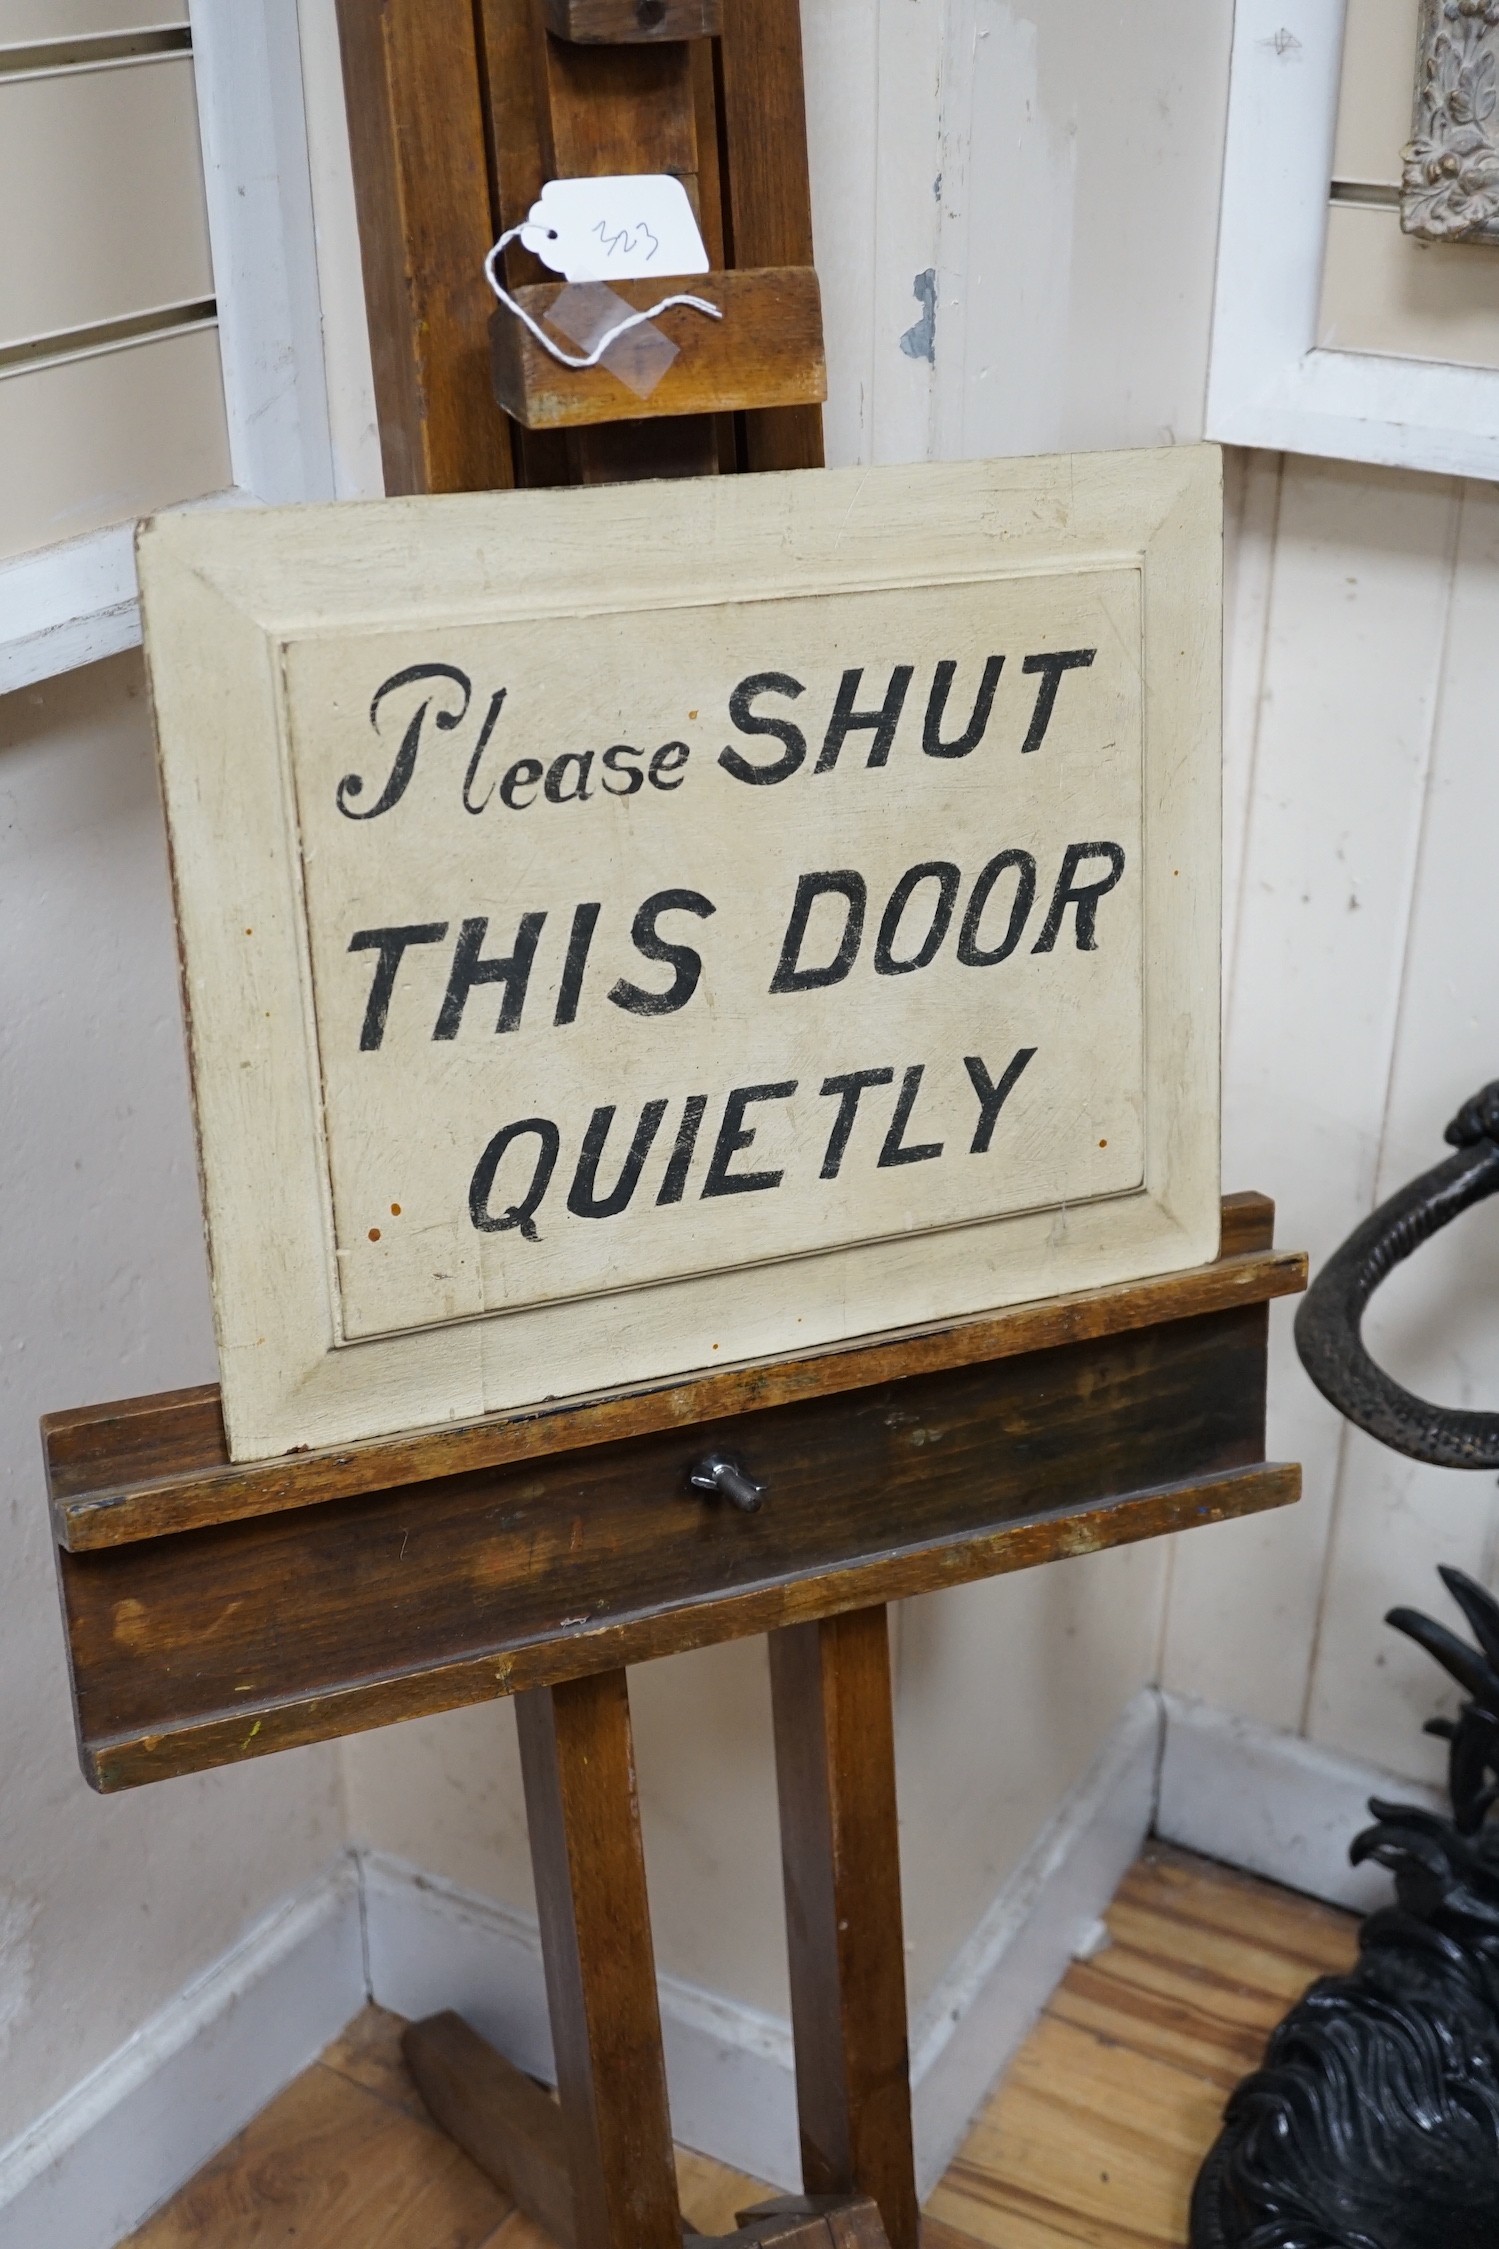 A beech artist's easel, height 170cm, with a door shutting sign *Please note the sale commences at 9am.